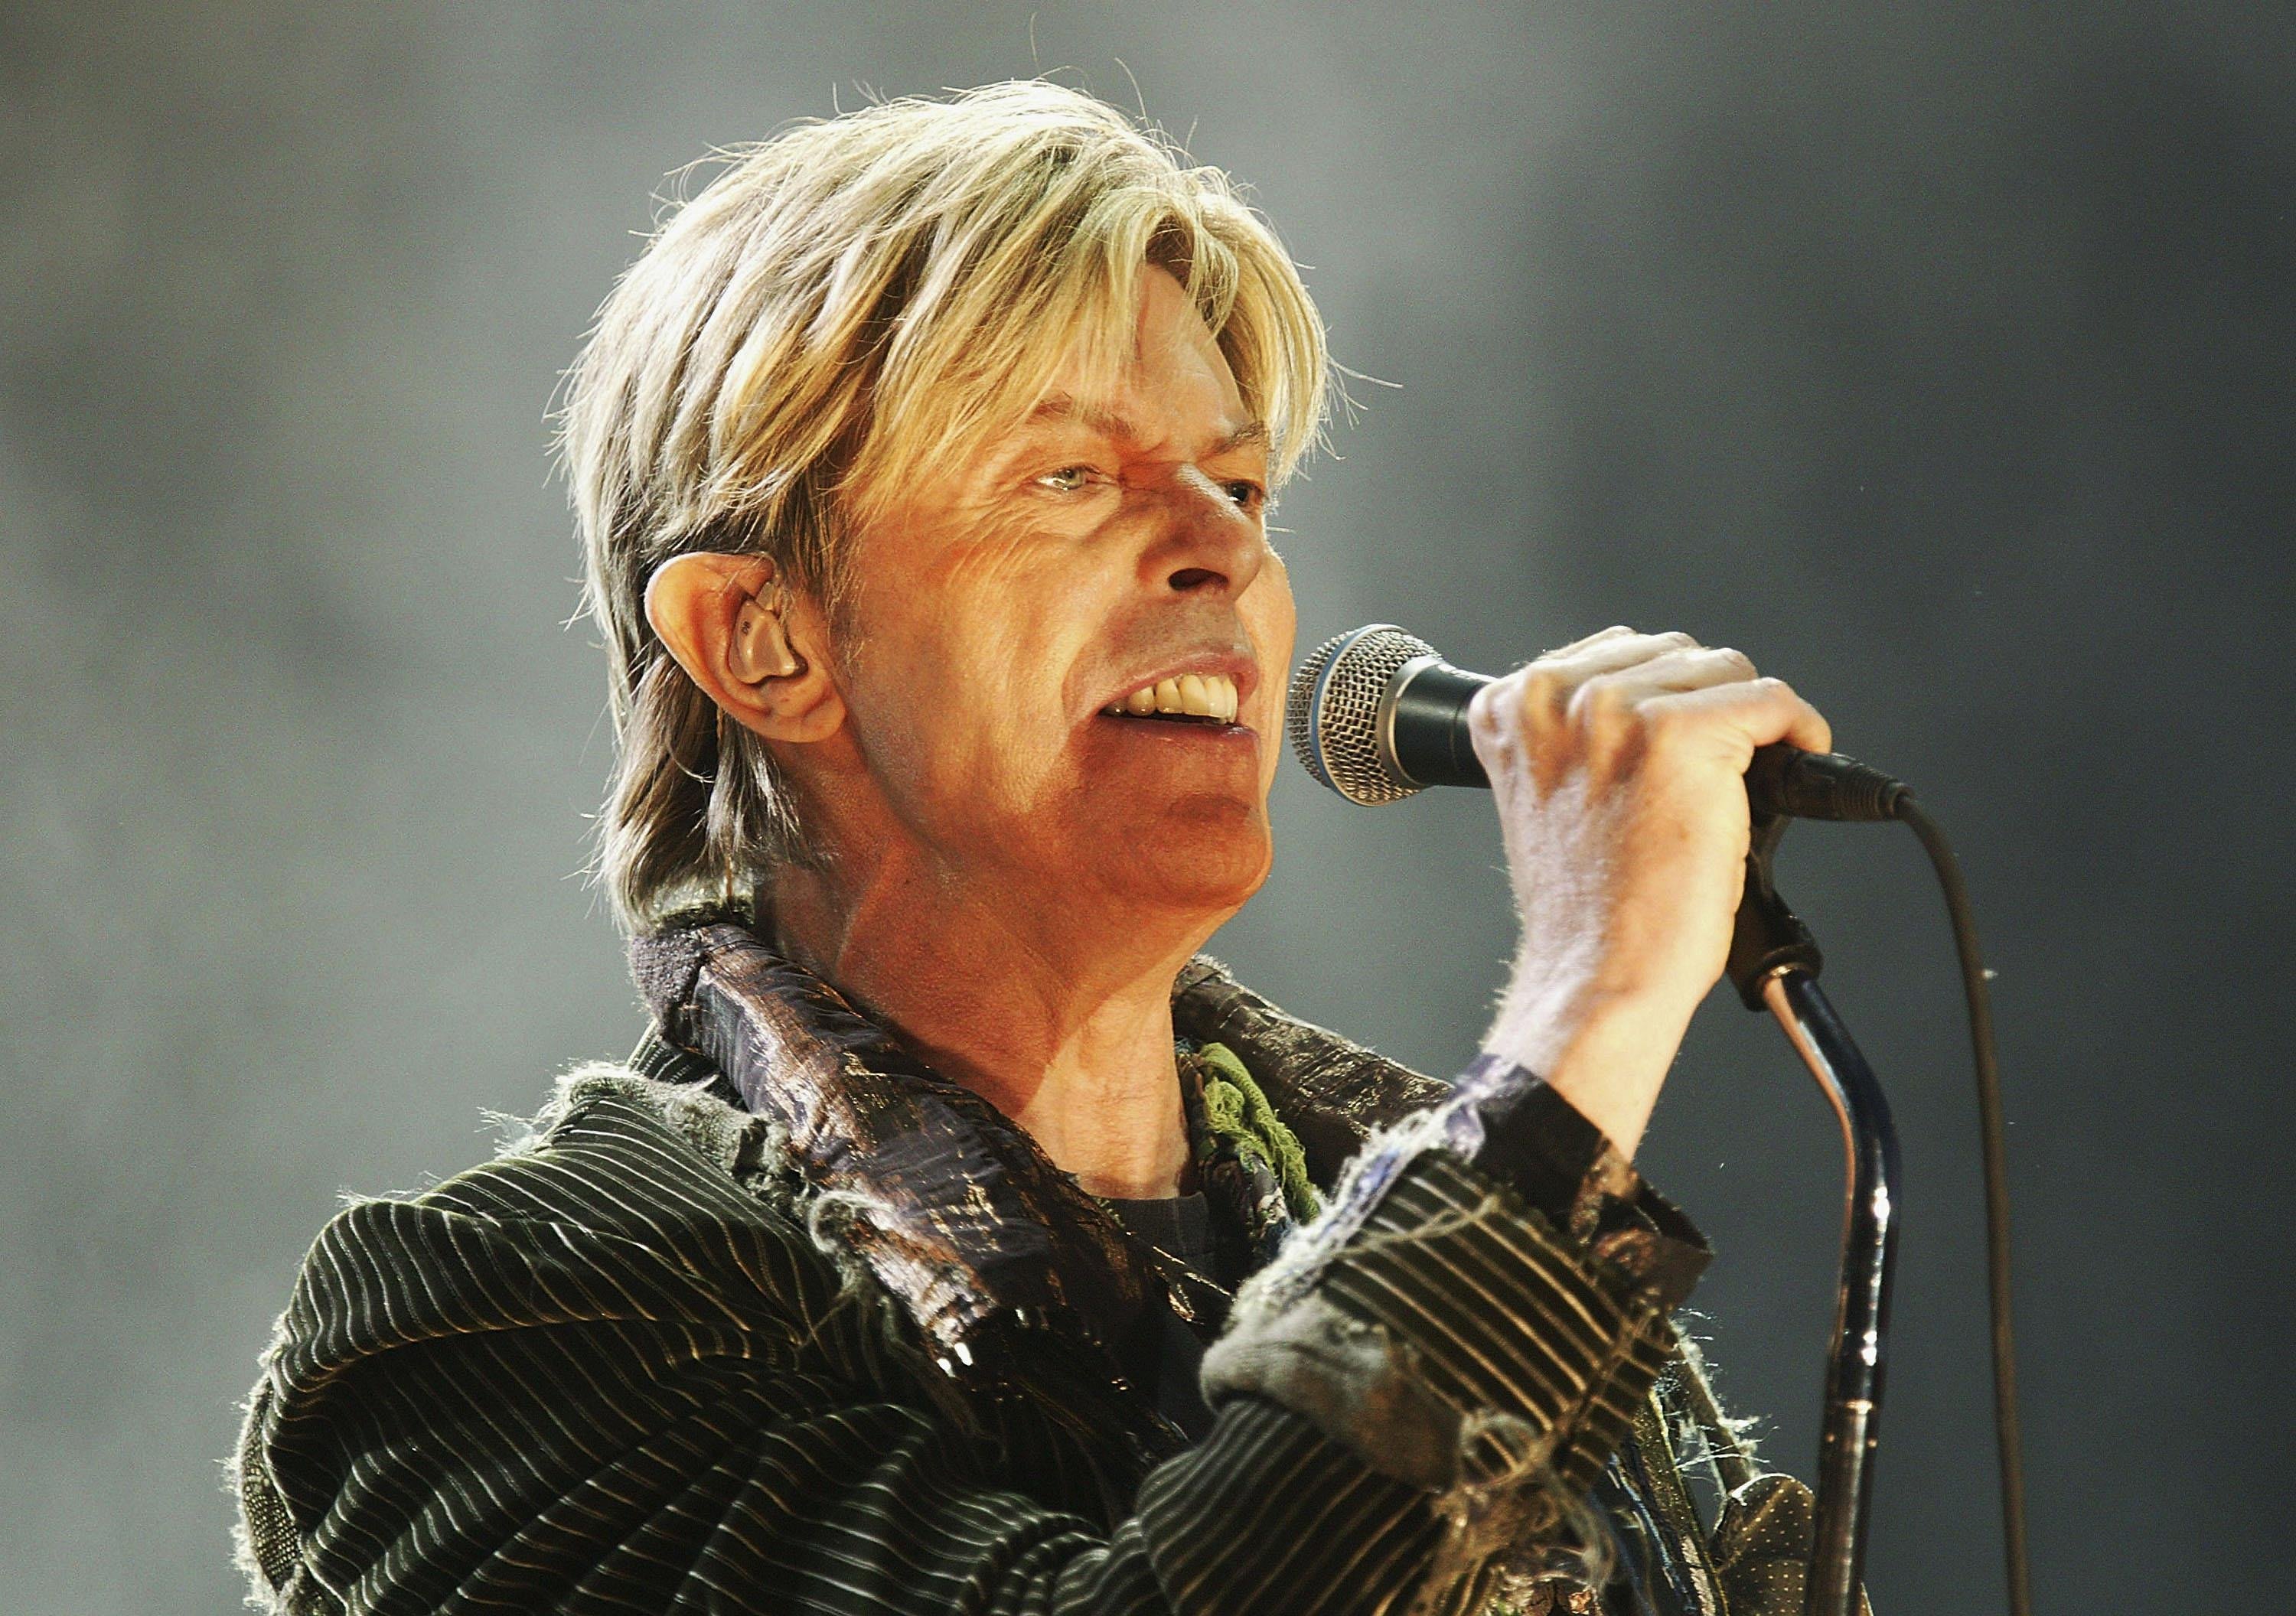 David Bowie: Tony Visconti tells how Heroes were made